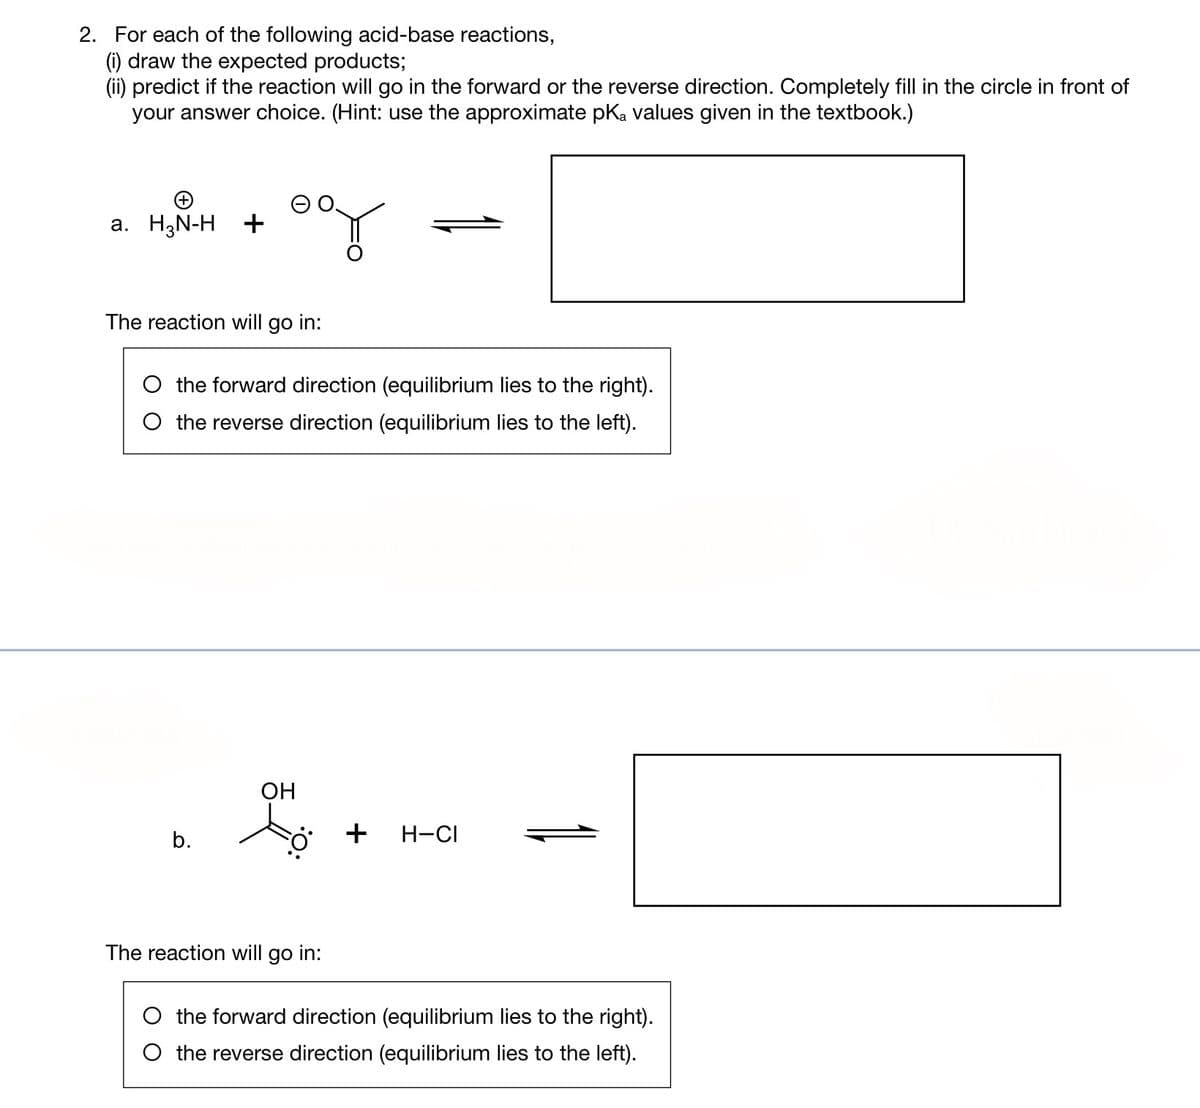 2. For each of the following acid-base reactions,
(i) draw the expected products;
(ii) predict if the reaction will go in the forward or the reverse direction. Completely fill in the circle in front of
your answer choice. (Hint: use the approximate pKa values given in the textbook.)
a. H₂N-H +
007
The reaction will go in:
O the forward direction (equilibrium lies to the right).
O the reverse direction (equilibrium lies to the left).
b.
OH
to
The reaction will go in:
+ H-CI
the forward direction (equilibrium lies to the right).
the reverse direction (equilibrium lies to the left).